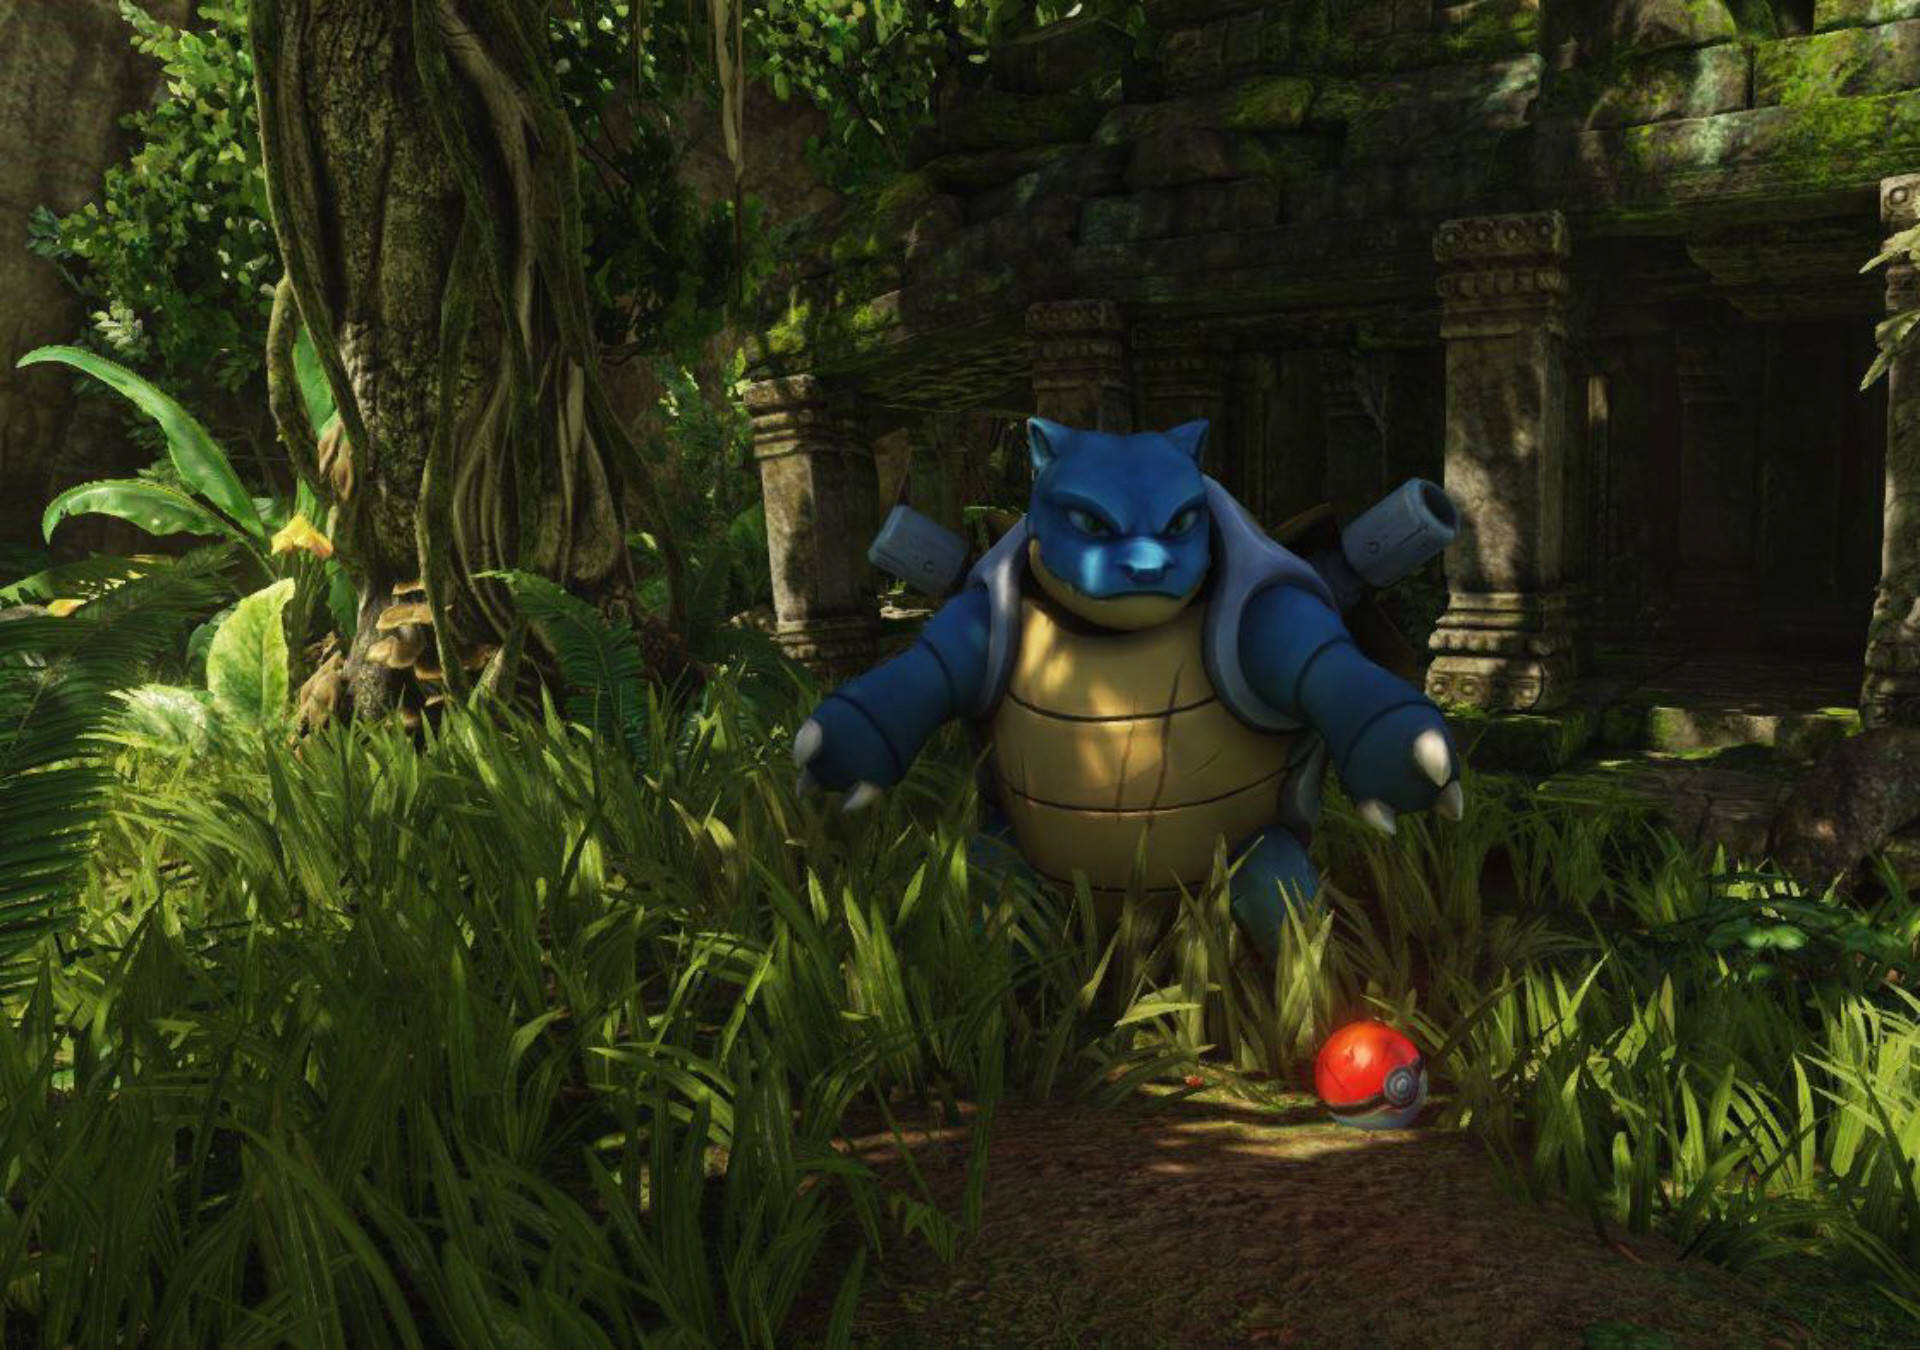 Blastoise, a powerful and majestic Pokémon, proudly stands in a lush jungle. Wallpaper